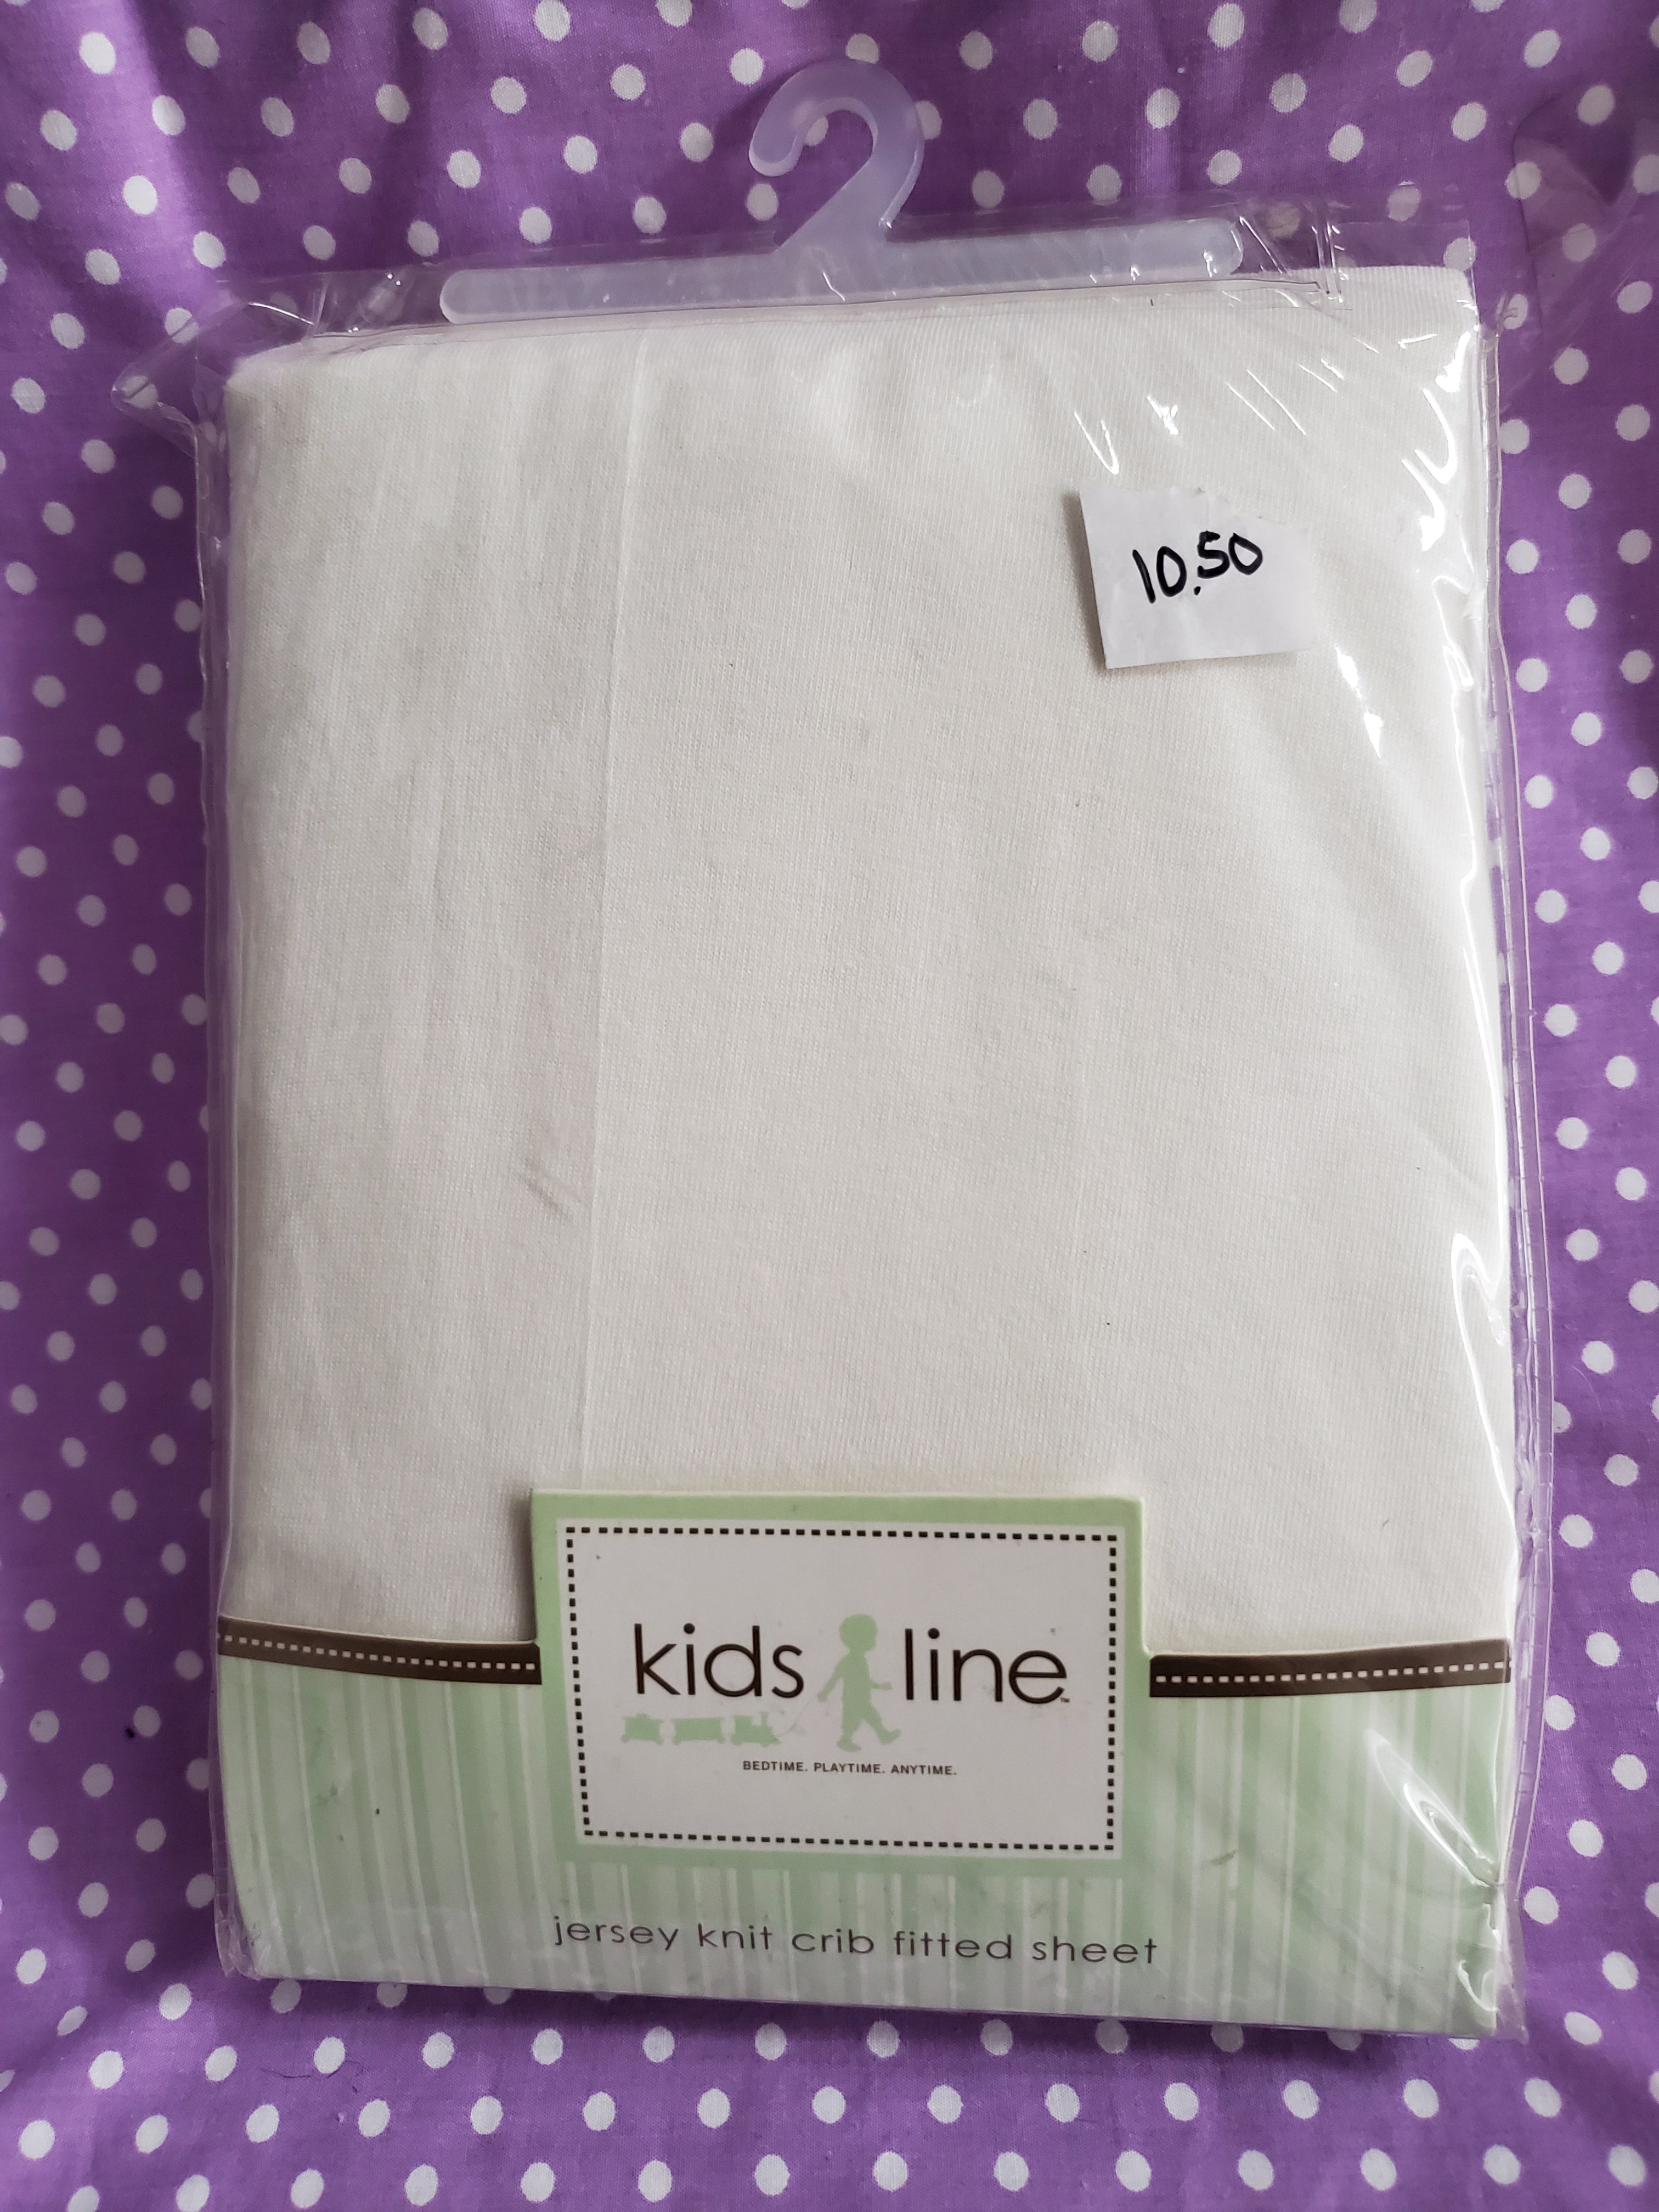 Kids line jersey knit fitted sheet